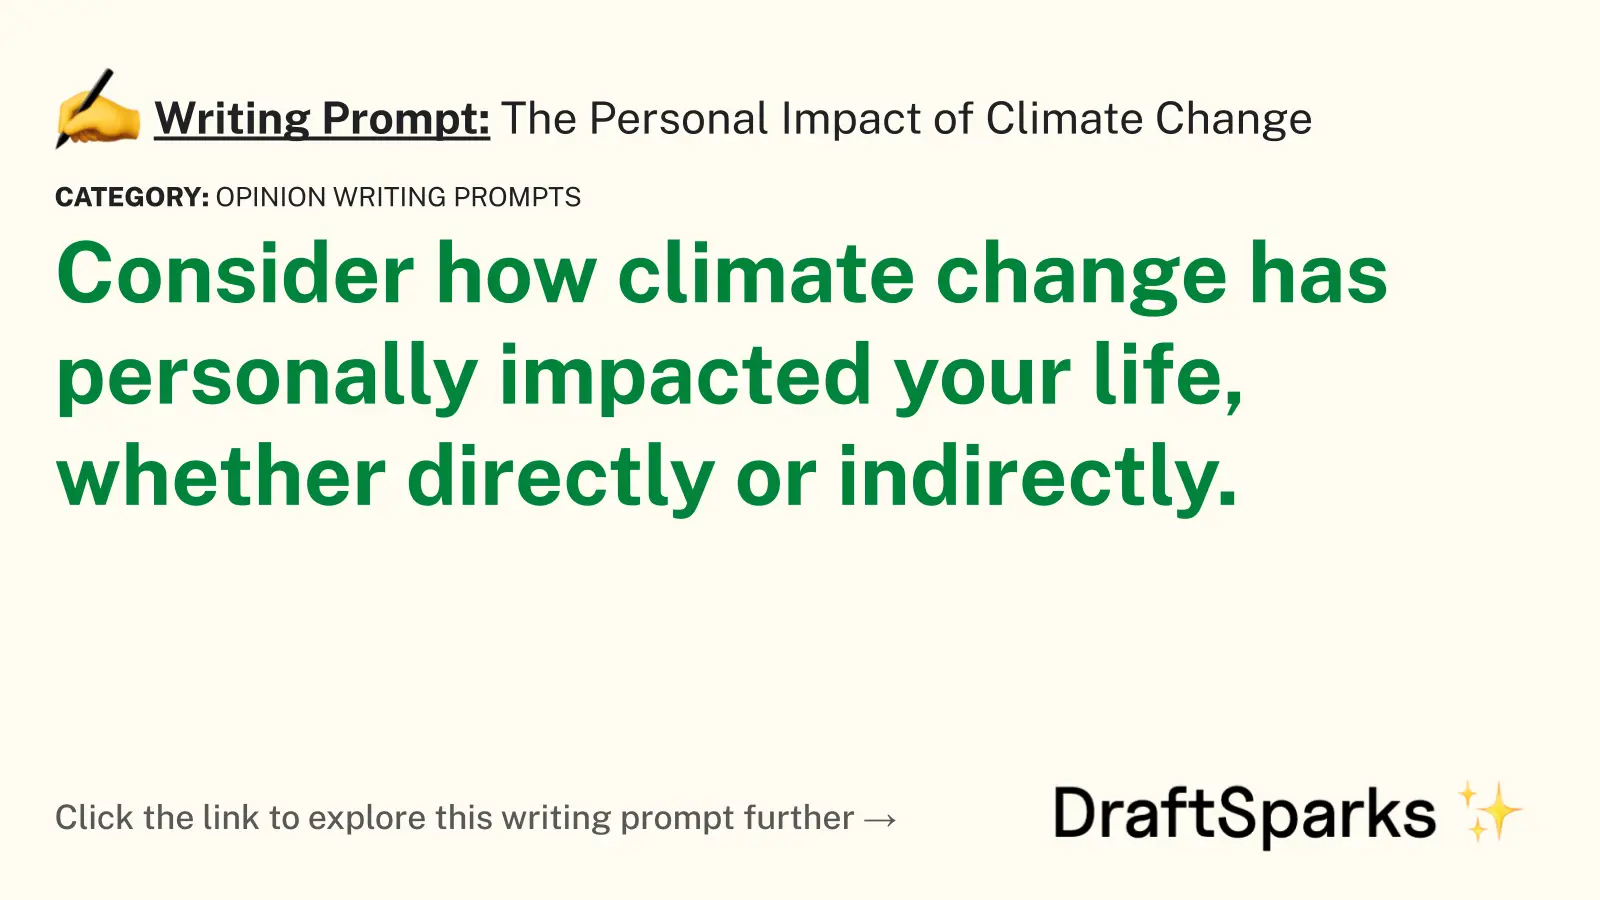 The Personal Impact of Climate Change